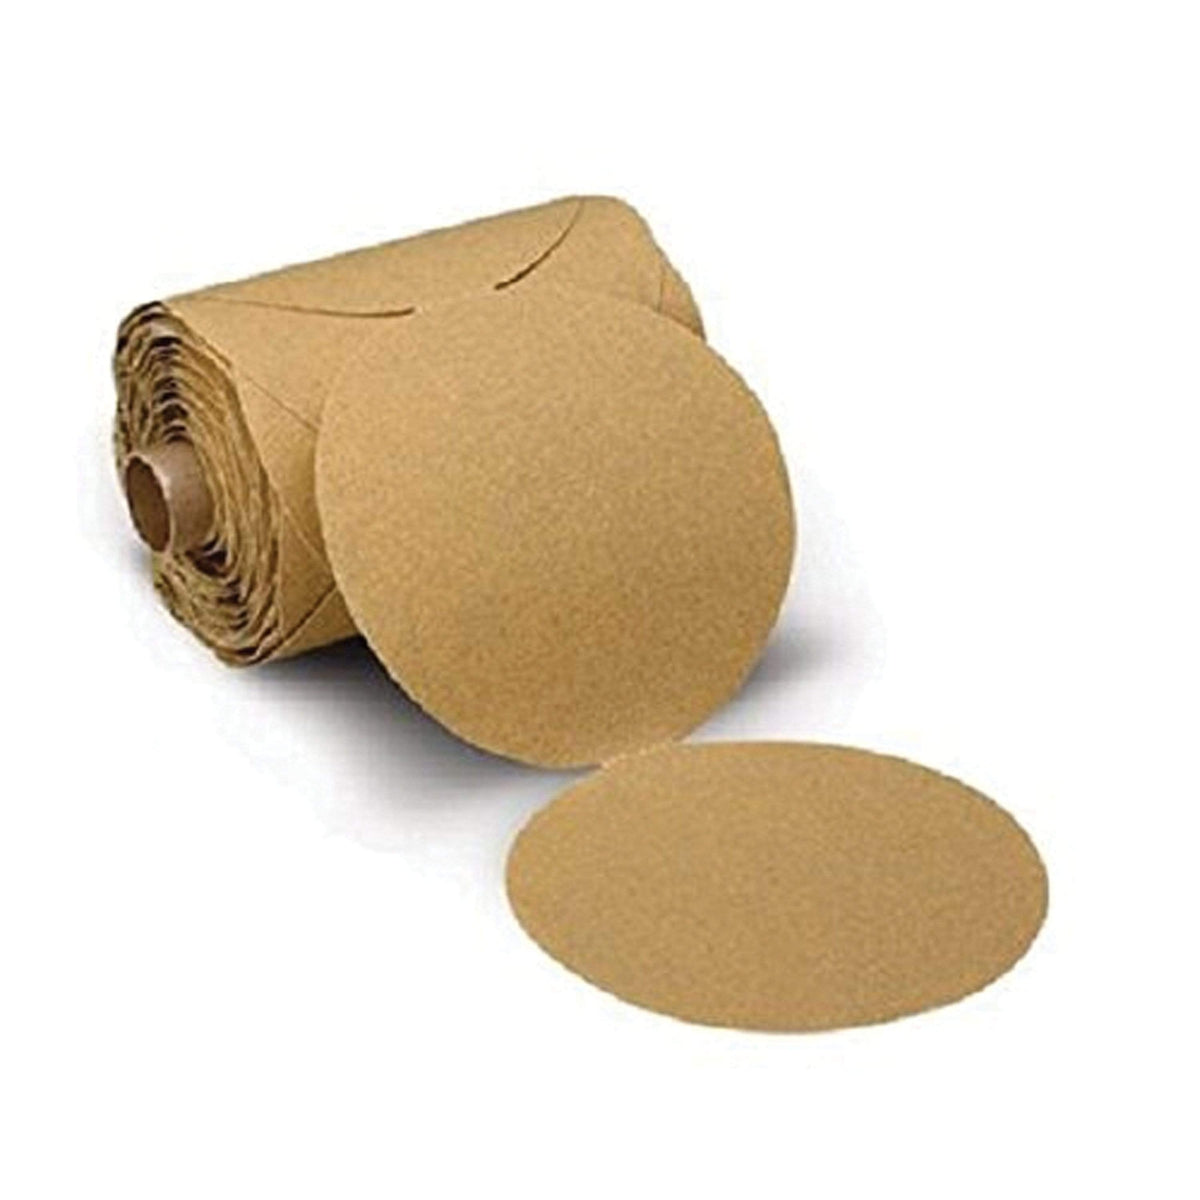 3M Stikit Paper Disc Roll 363i 6" Nh 180 F-Weight 100-pc #21789